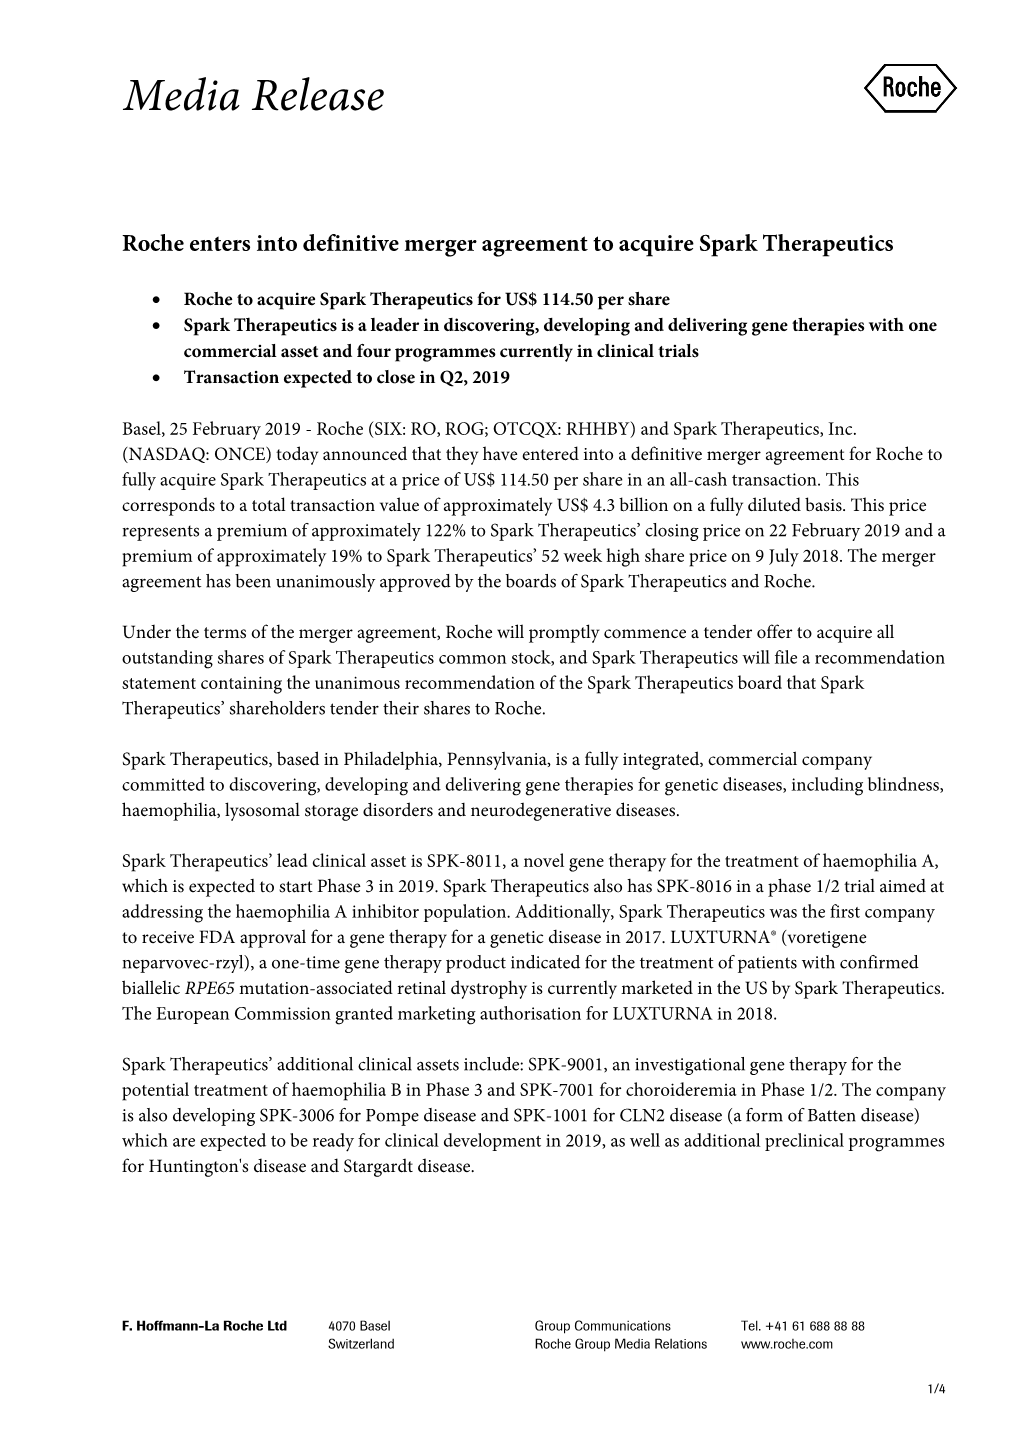 Roche Enters Into Definitive Merger Agreement to Acquire Spark Therapeutics